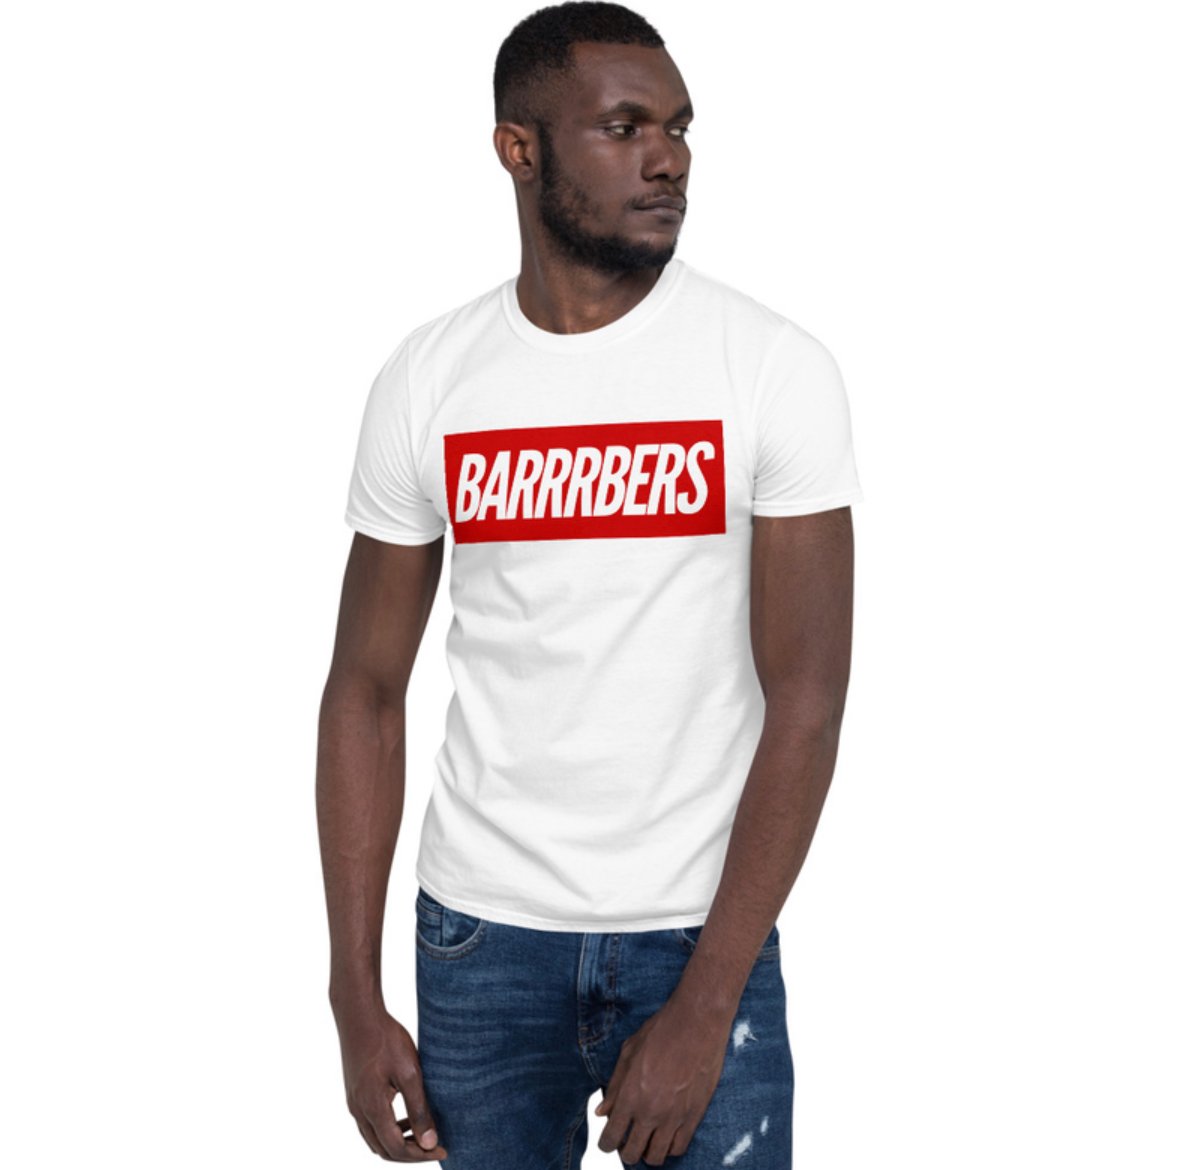 Image of We Are Supreme “BARRRBERS” White T-shirt!